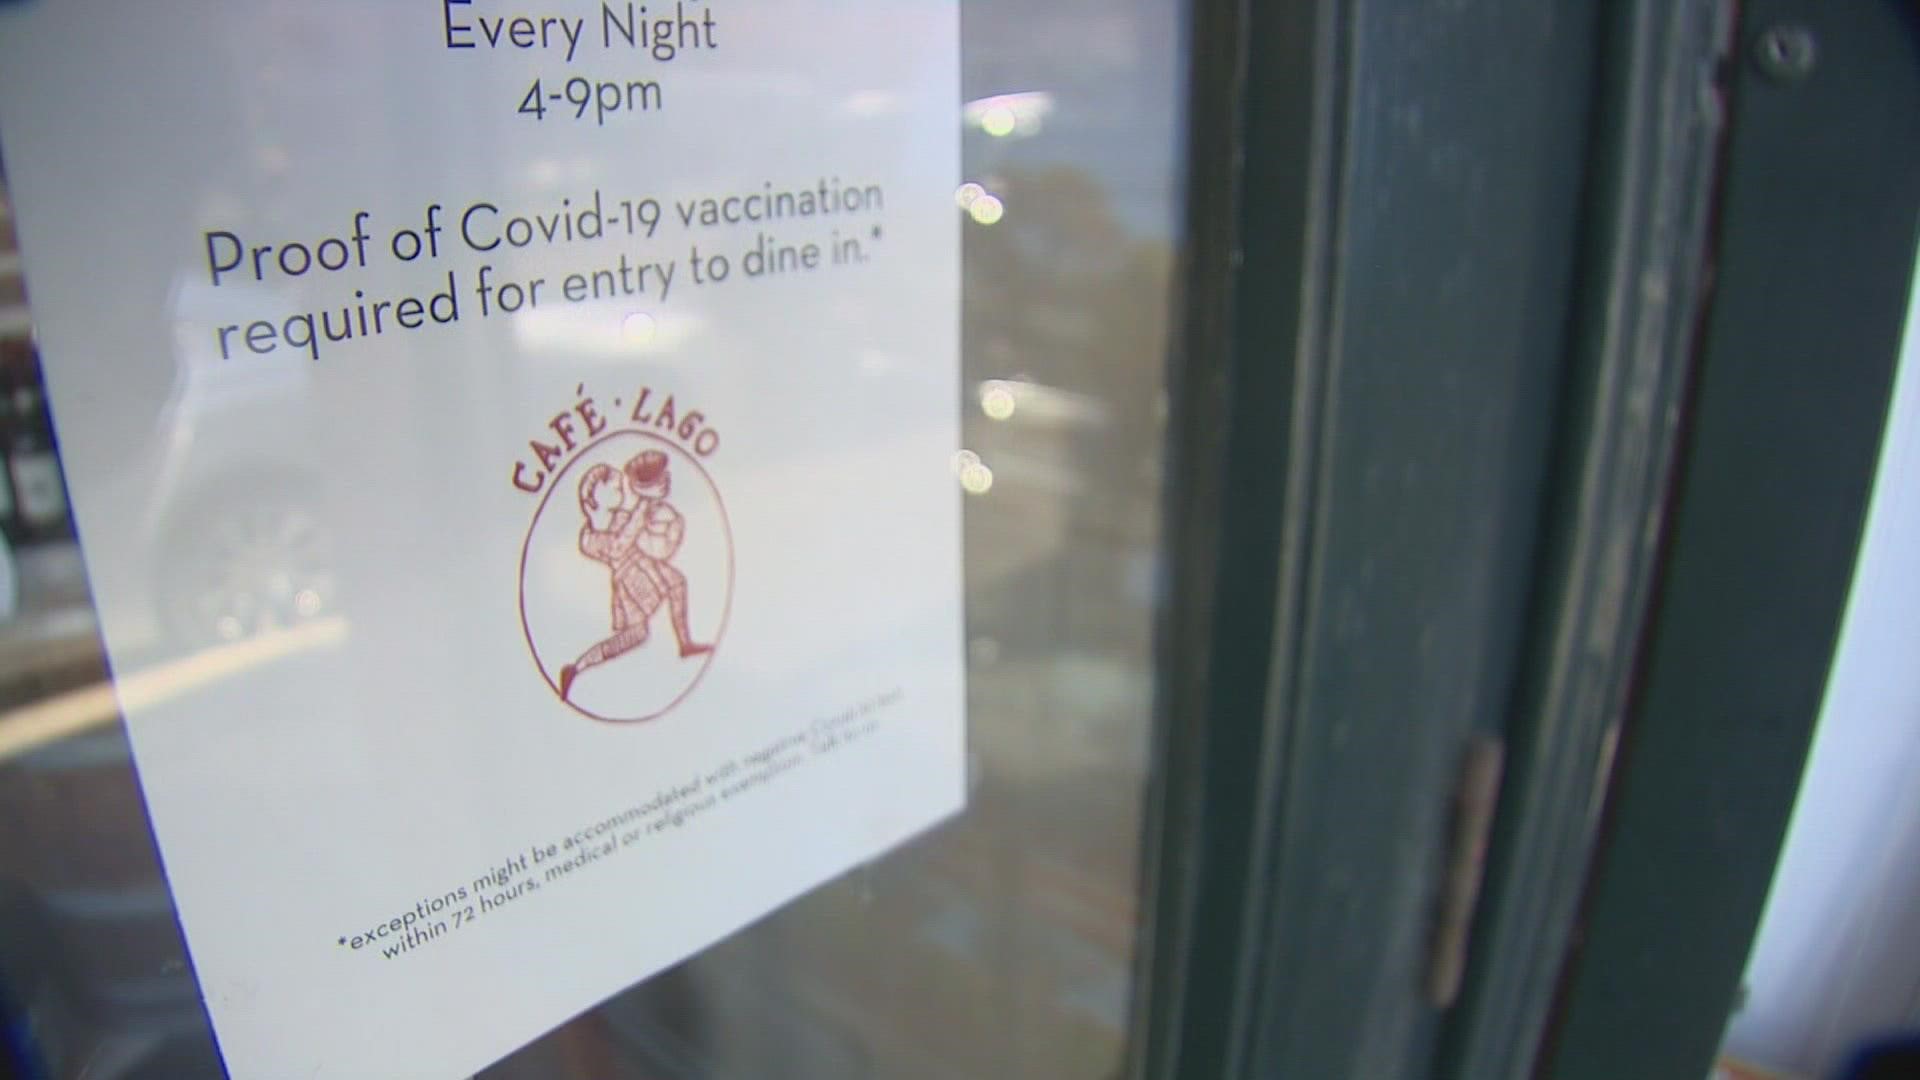 Diners must show proof of vaccination or a negative COVID-19 test to eat indoors at King County restaurants come October. Café Lago's staff says it's about time.